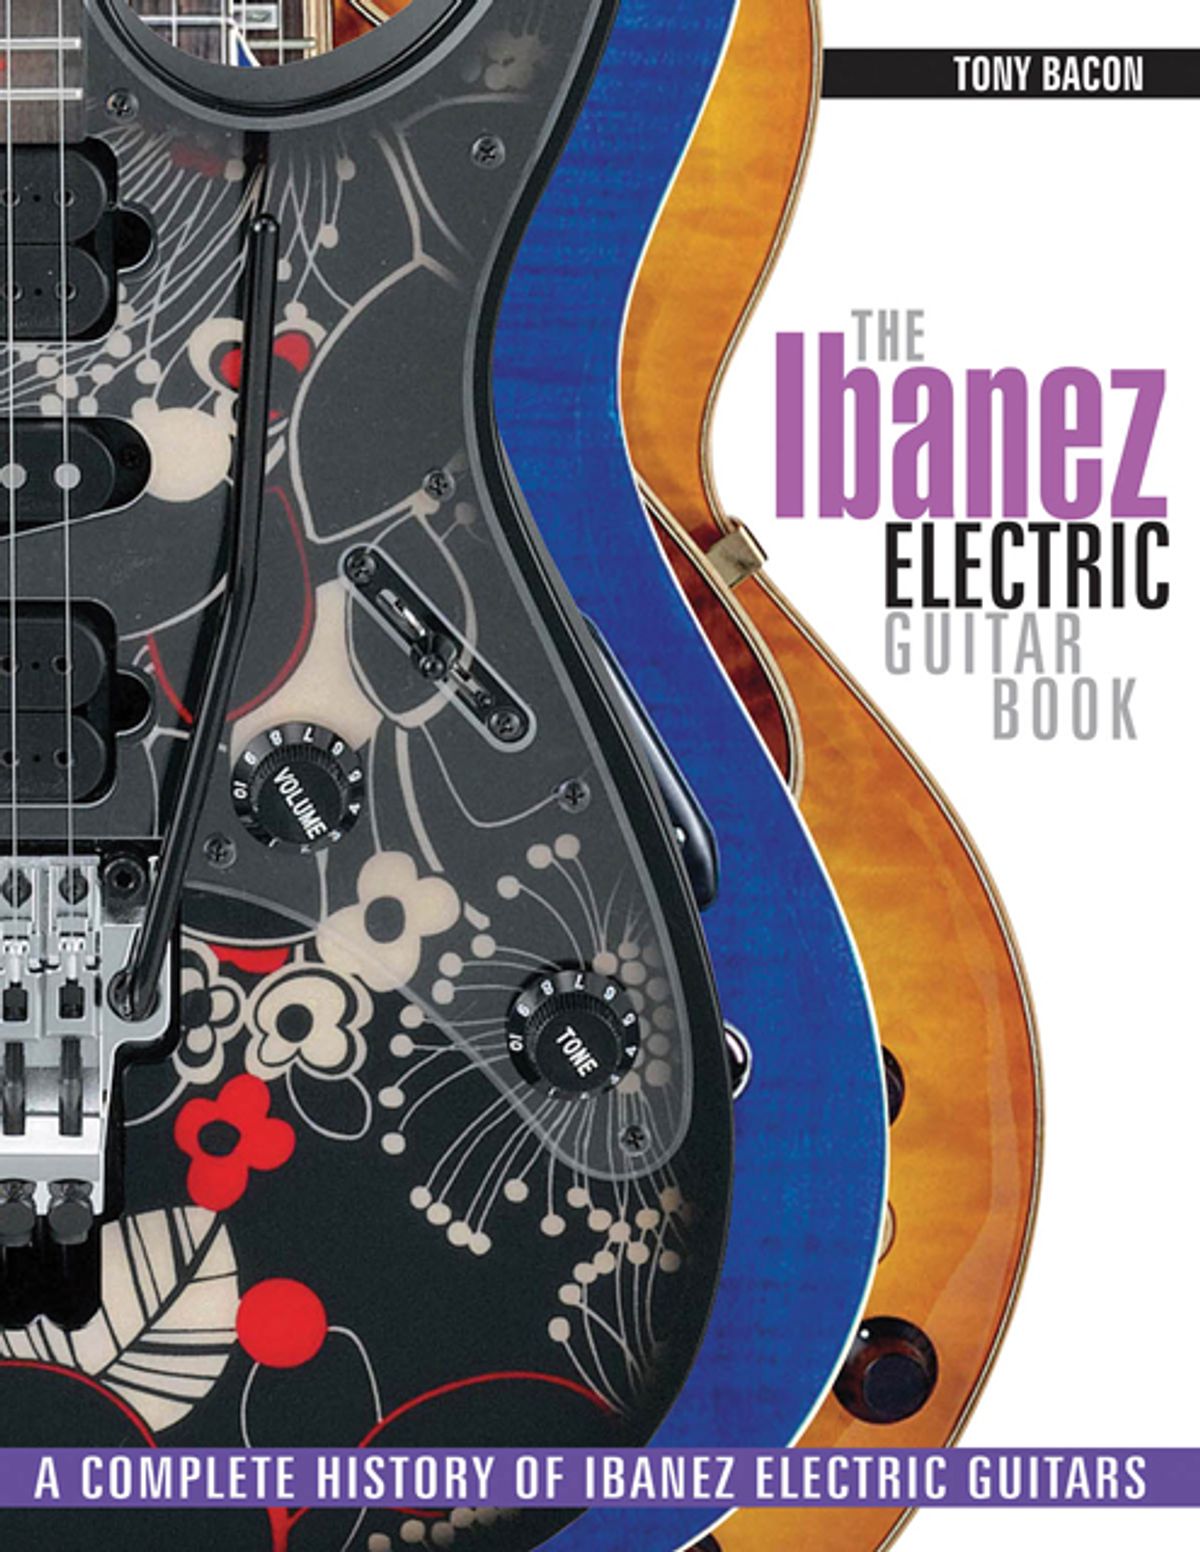 Backbeat Books Publishes The Ibanez Electric Guitar Book